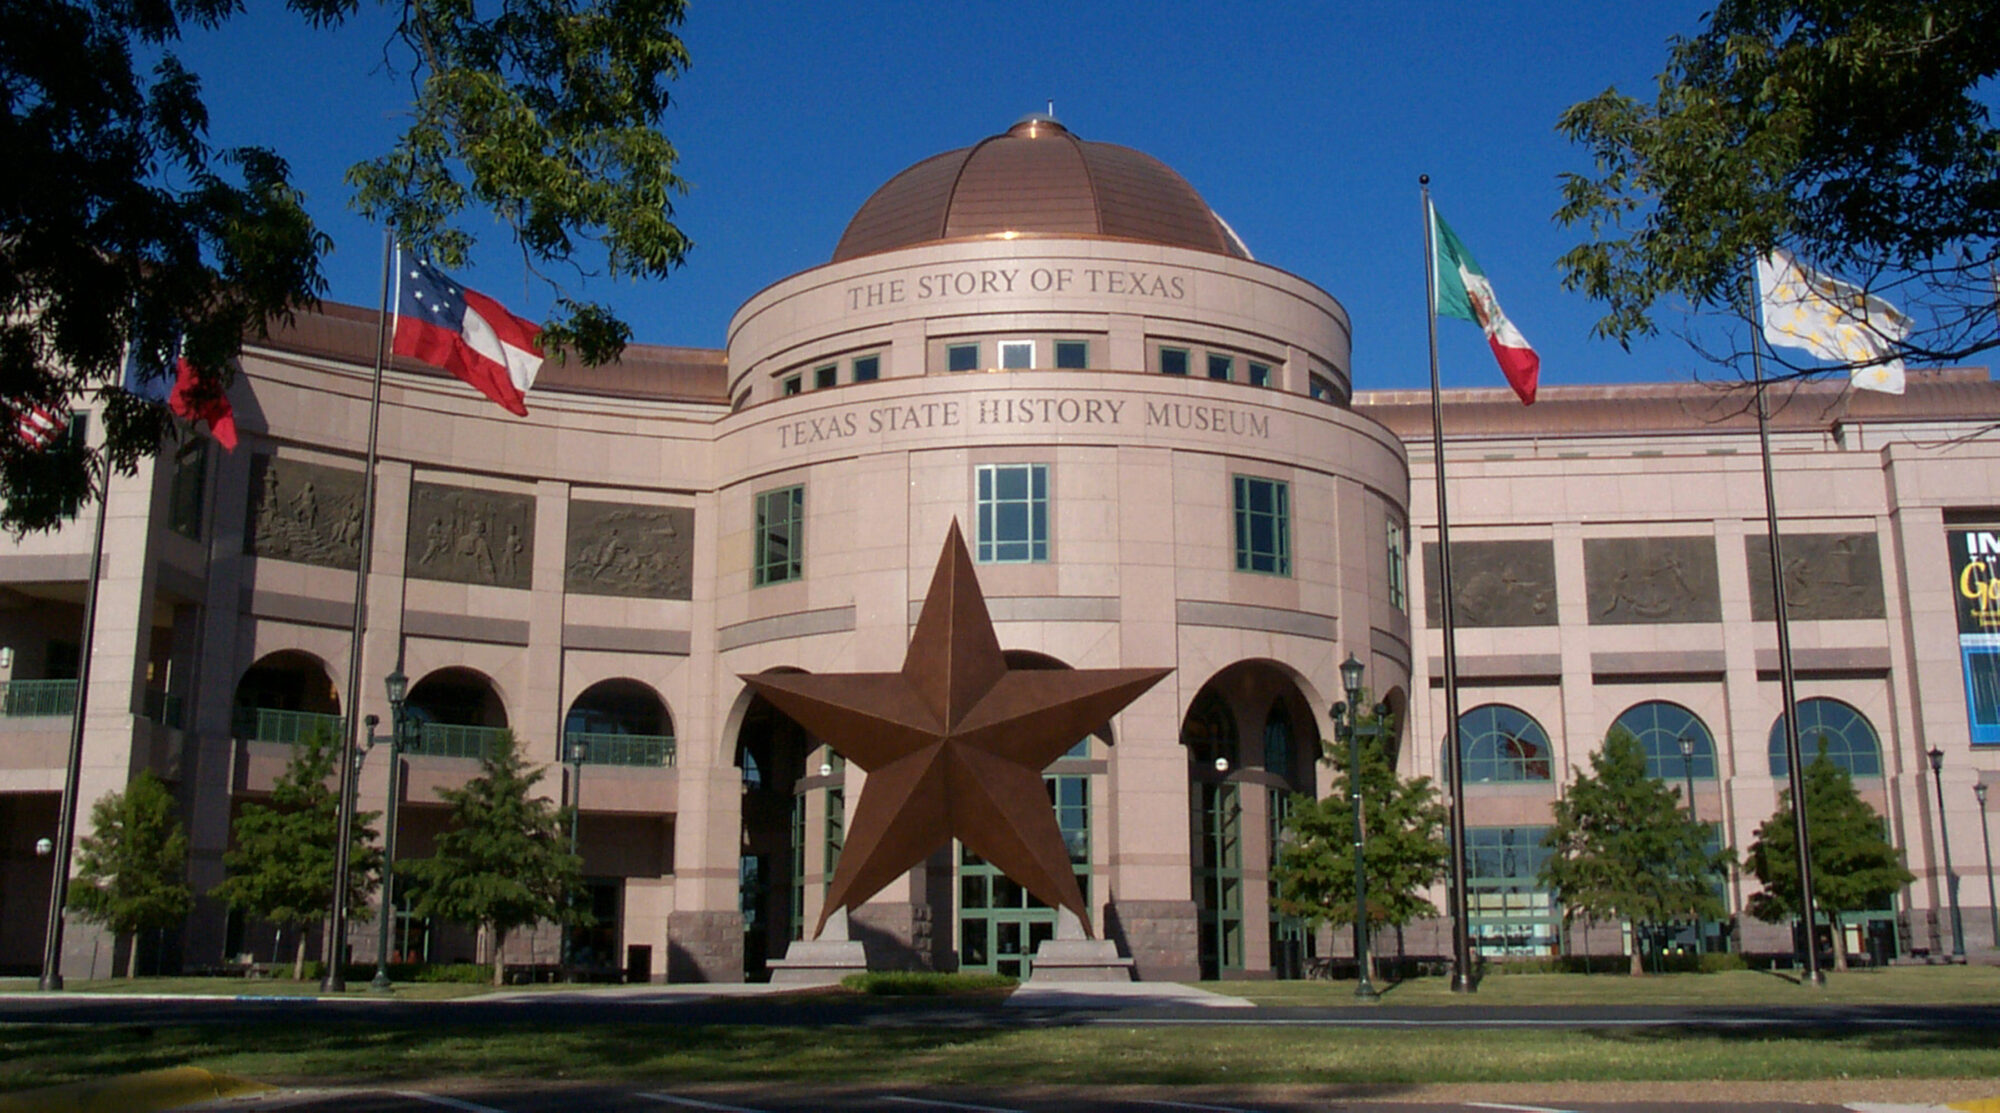 Campbell - TEXAS STATE HISTORY MUSEUM FOUNDATION